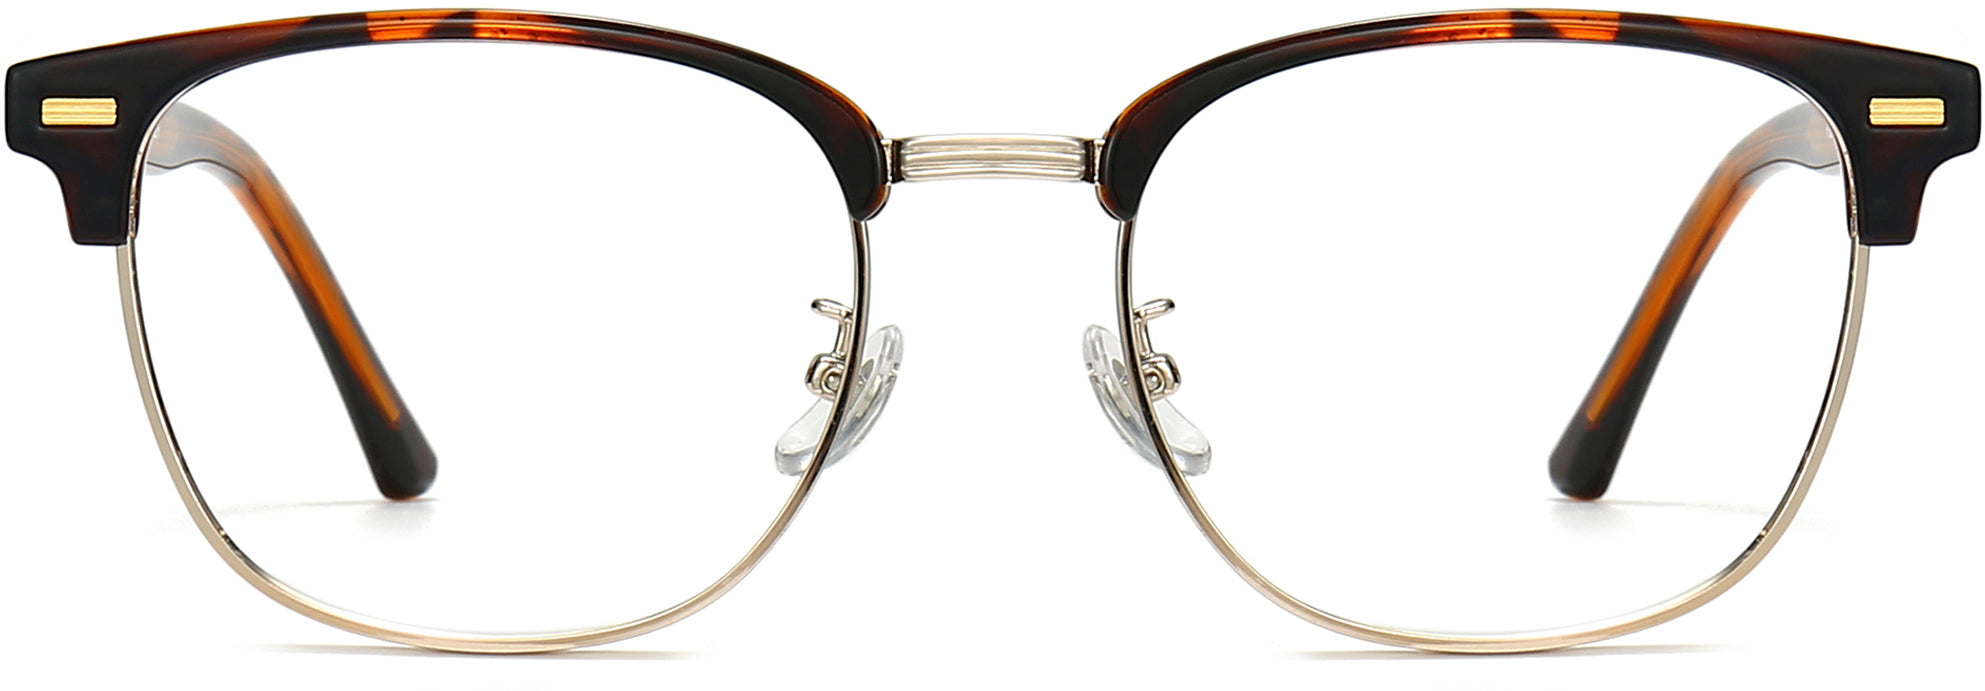 Alexis Browline Tortoise Eyeglasses from ANRRI, front view